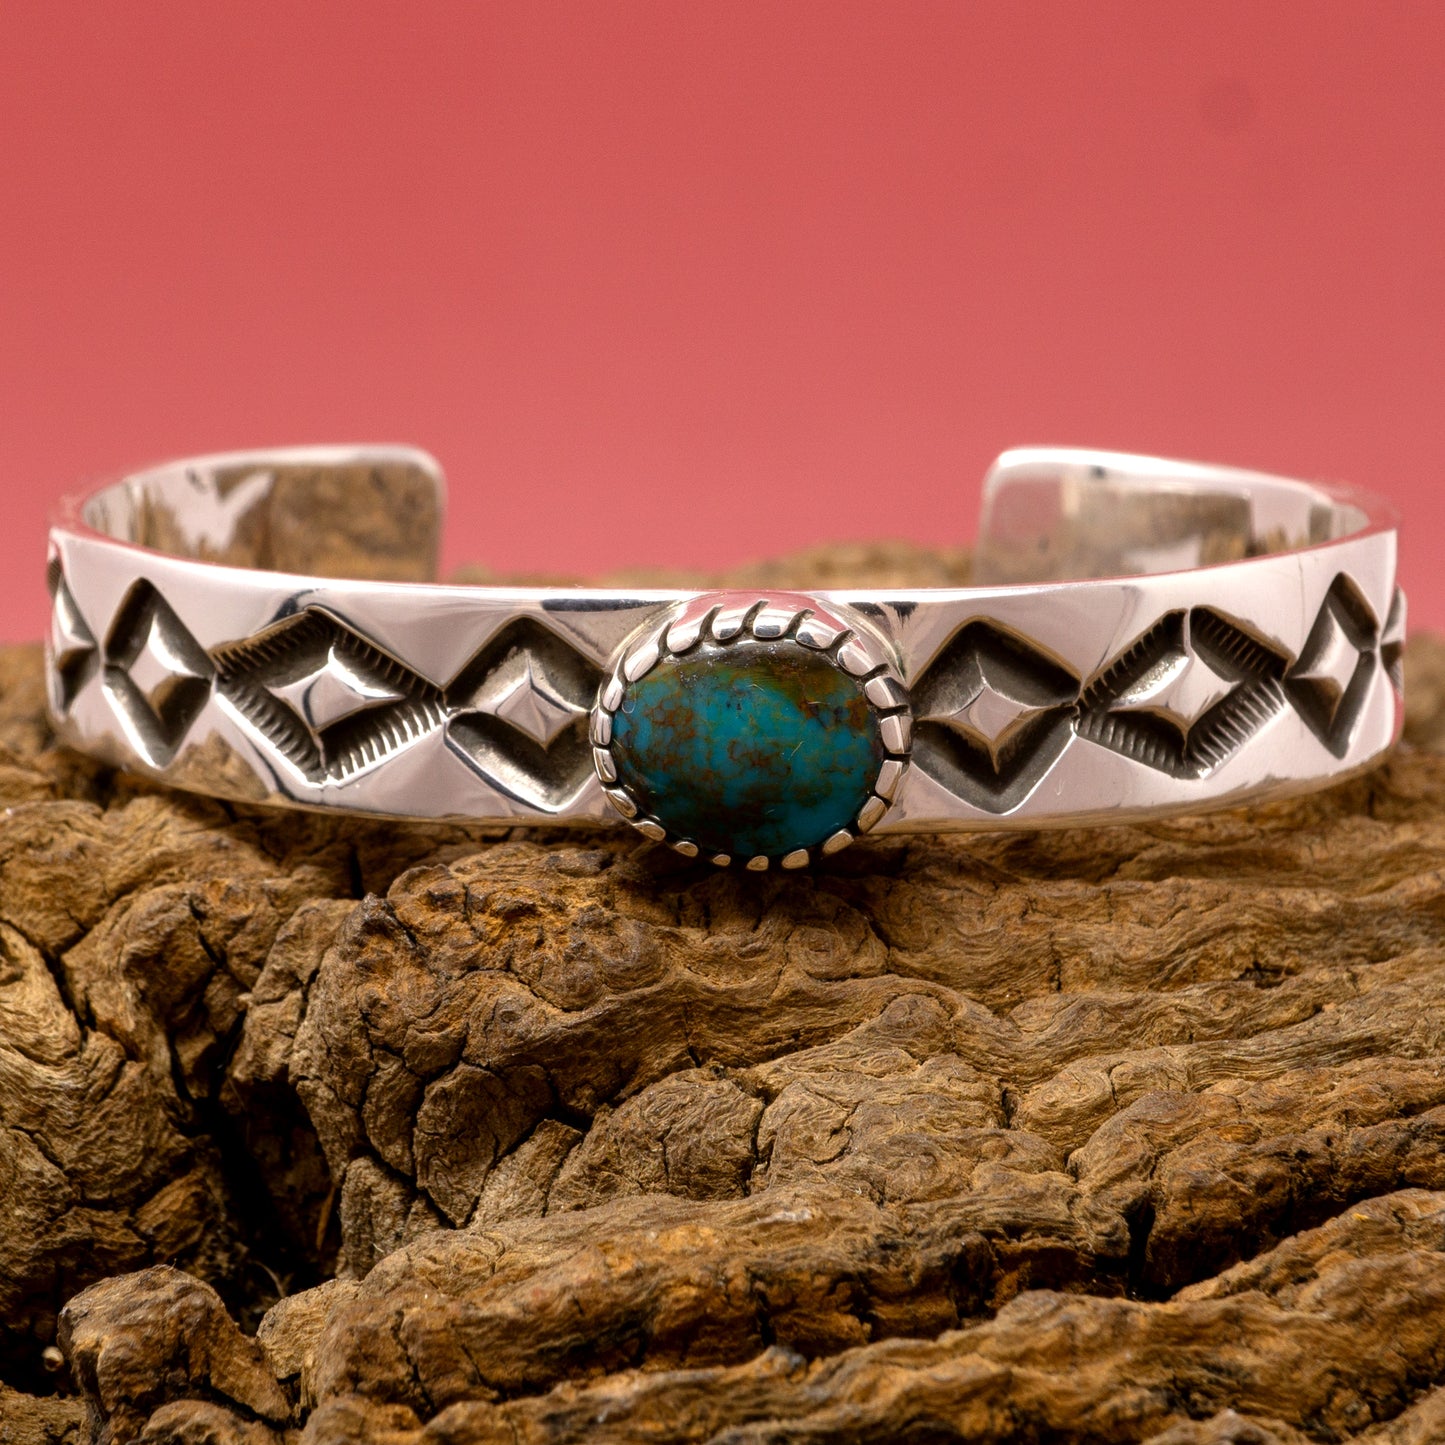 Bisbee Turquoise Polished Stamped Cuff Bracelet